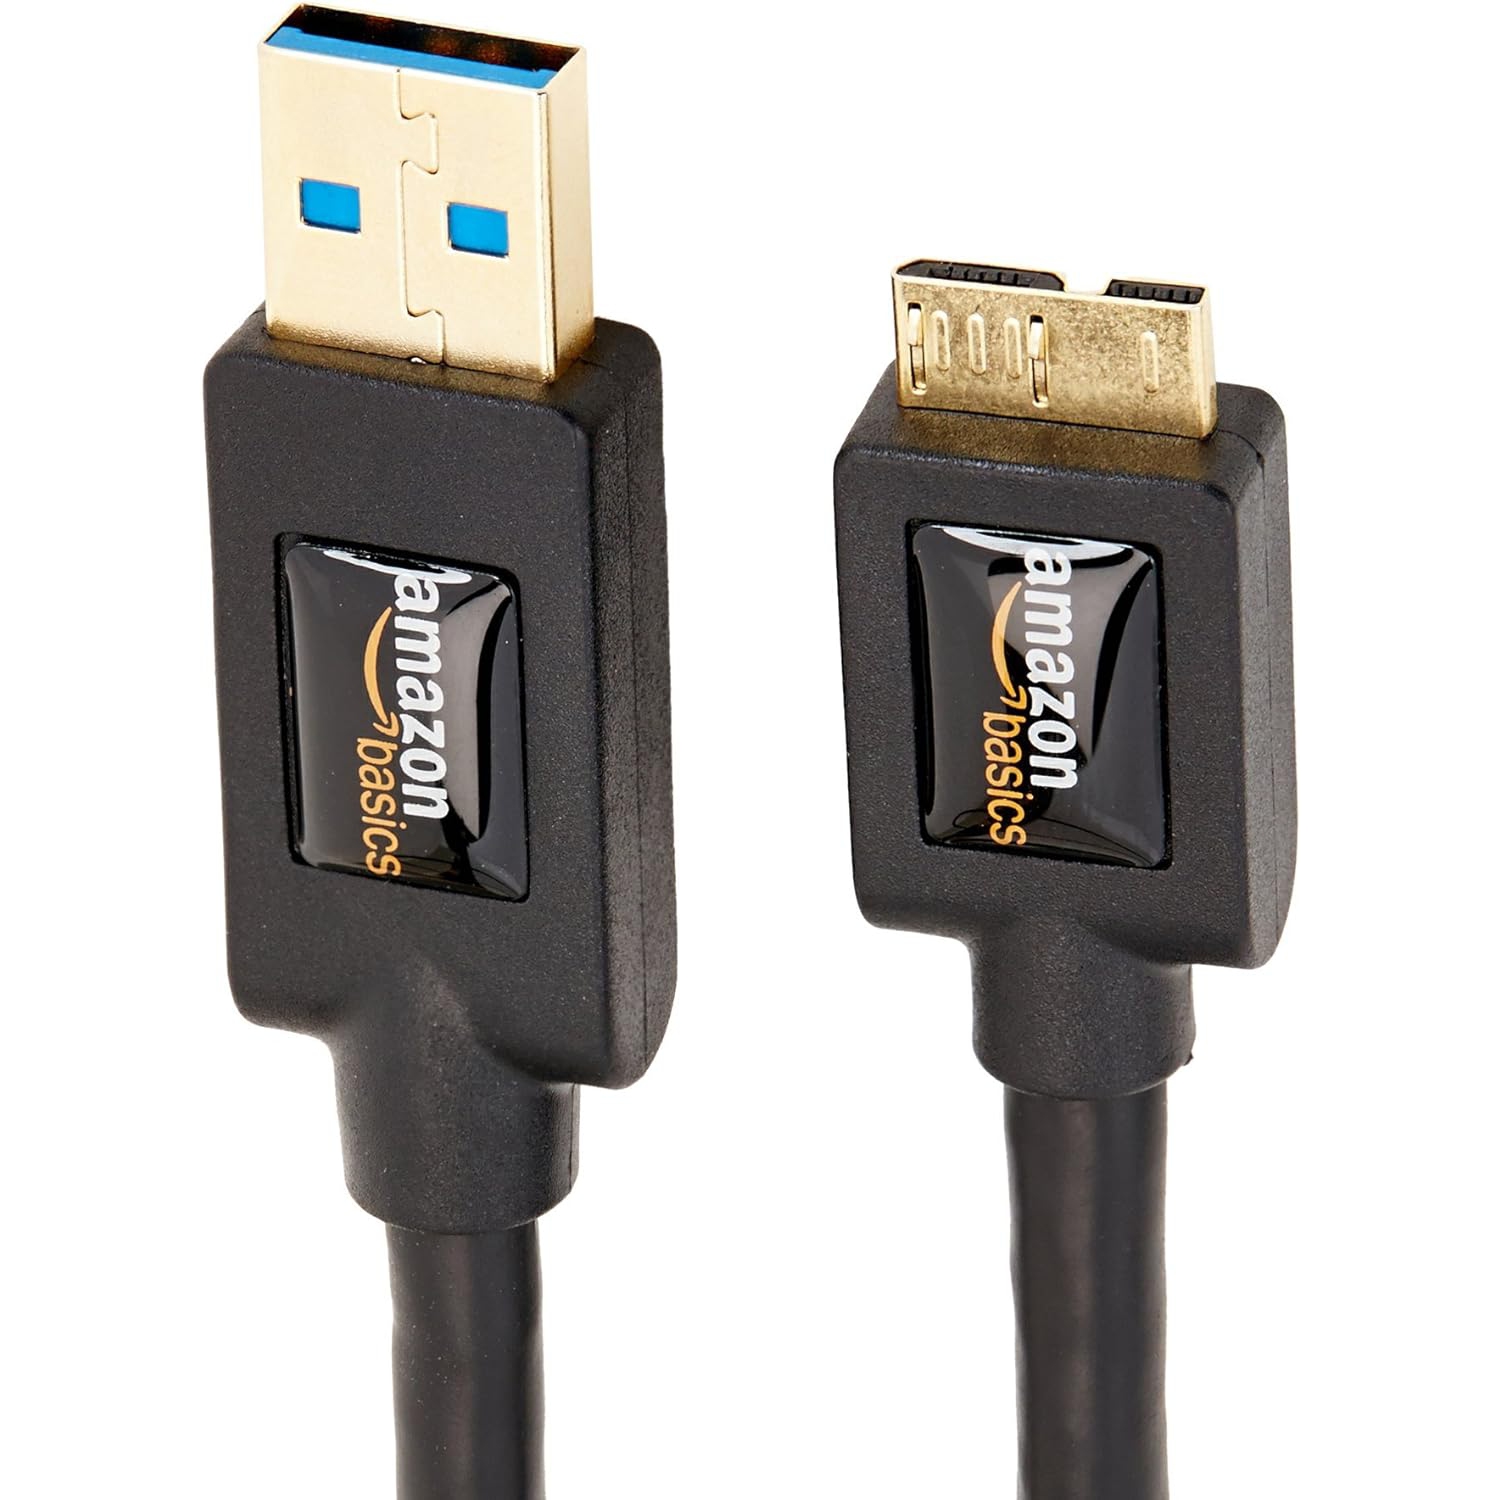 Z25K USB 3.0 Cable - A-Male to Micro-B - 6 Feet (1.8 Meters 